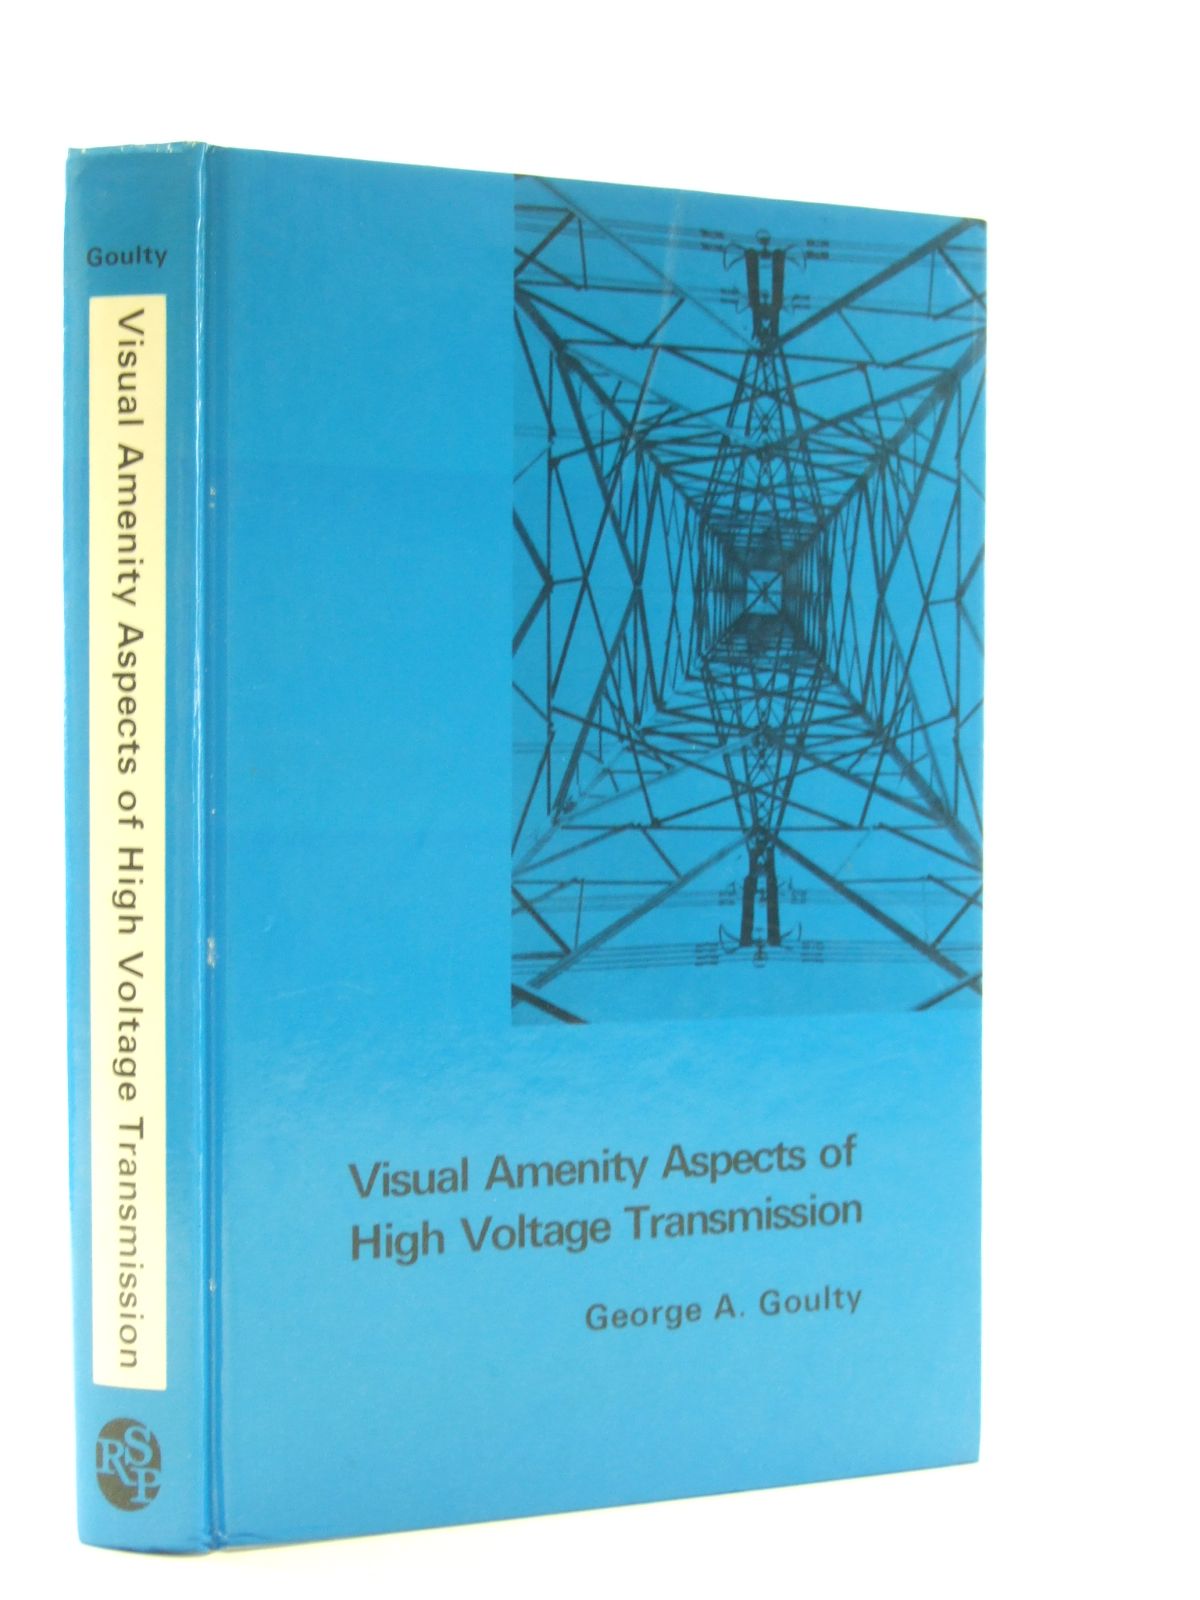 Photo of VISUAL AMENITY ASPECTS OF HIGH VOLTAGE TRANSMISSION written by Goulty, George A. published by Research Studies Press (STOCK CODE: 1207230)  for sale by Stella & Rose's Books